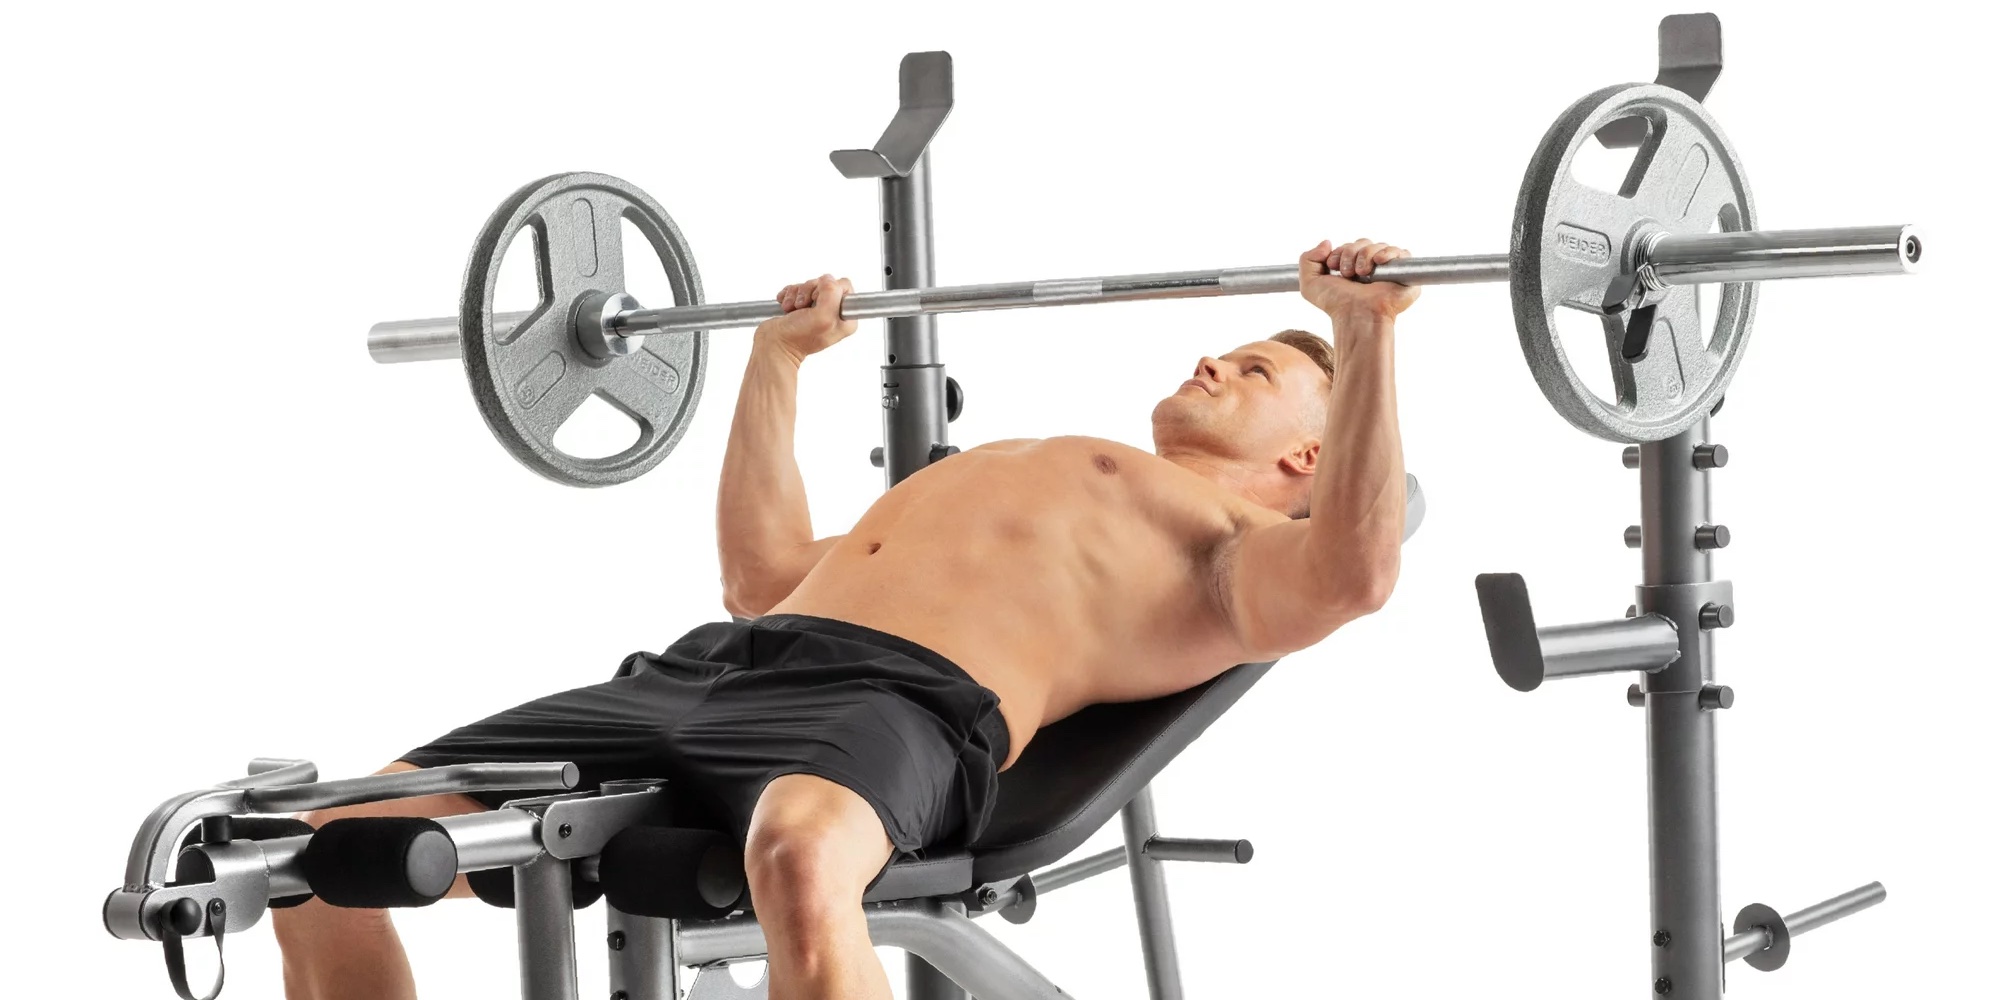 Weider XRS bench home rig with squat rack now down at $129 shipped (Reg.